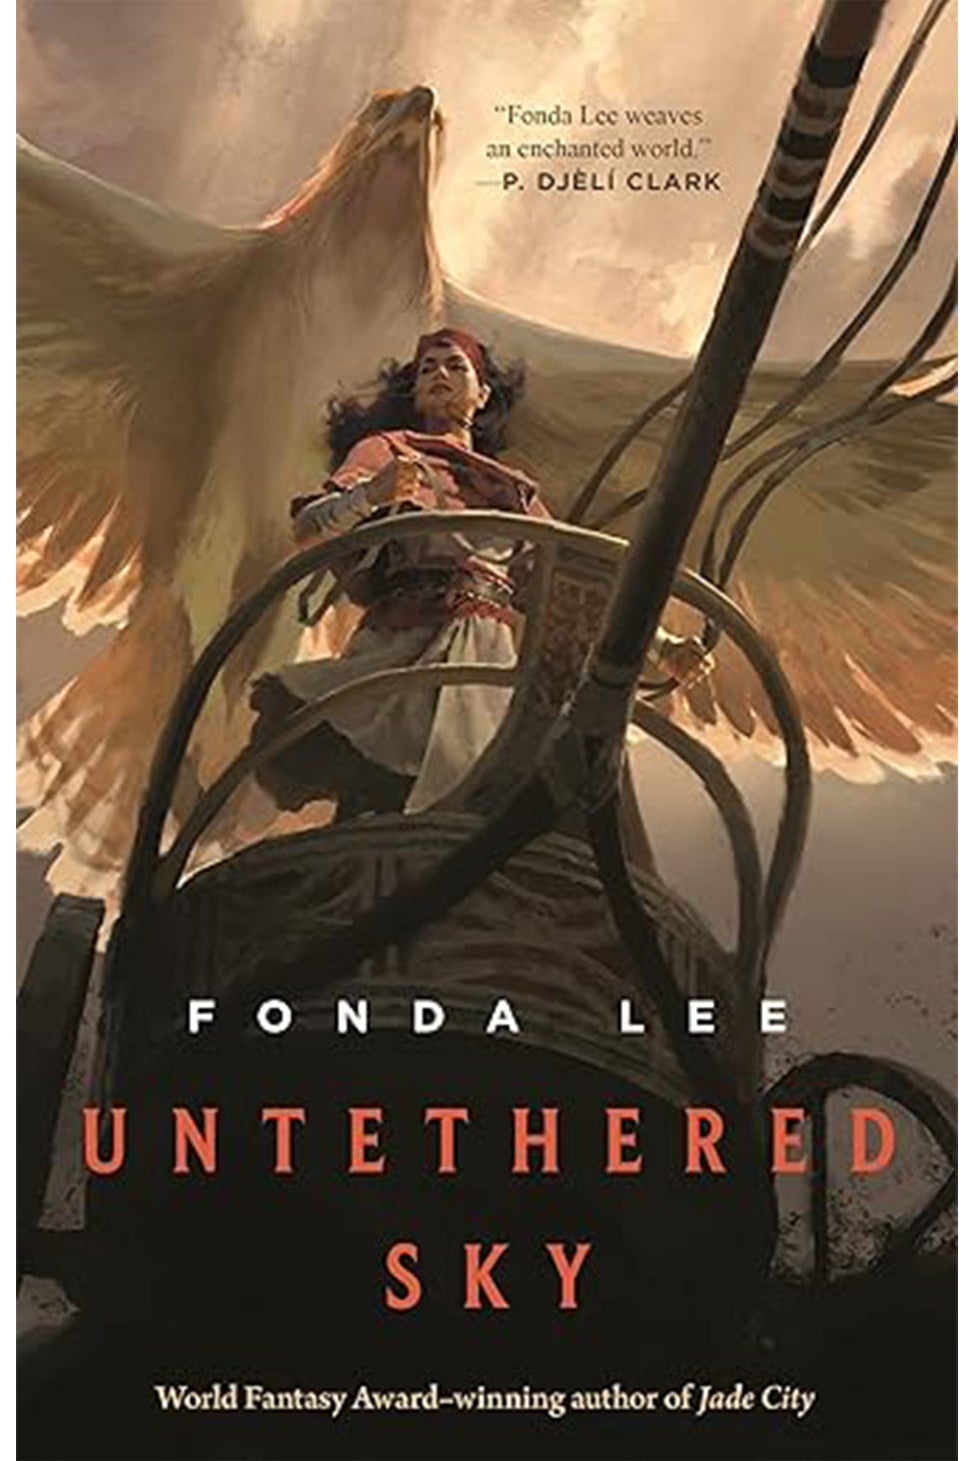 A book jacket has a woman steering some kind of chariot with a huge bird looming behind her.